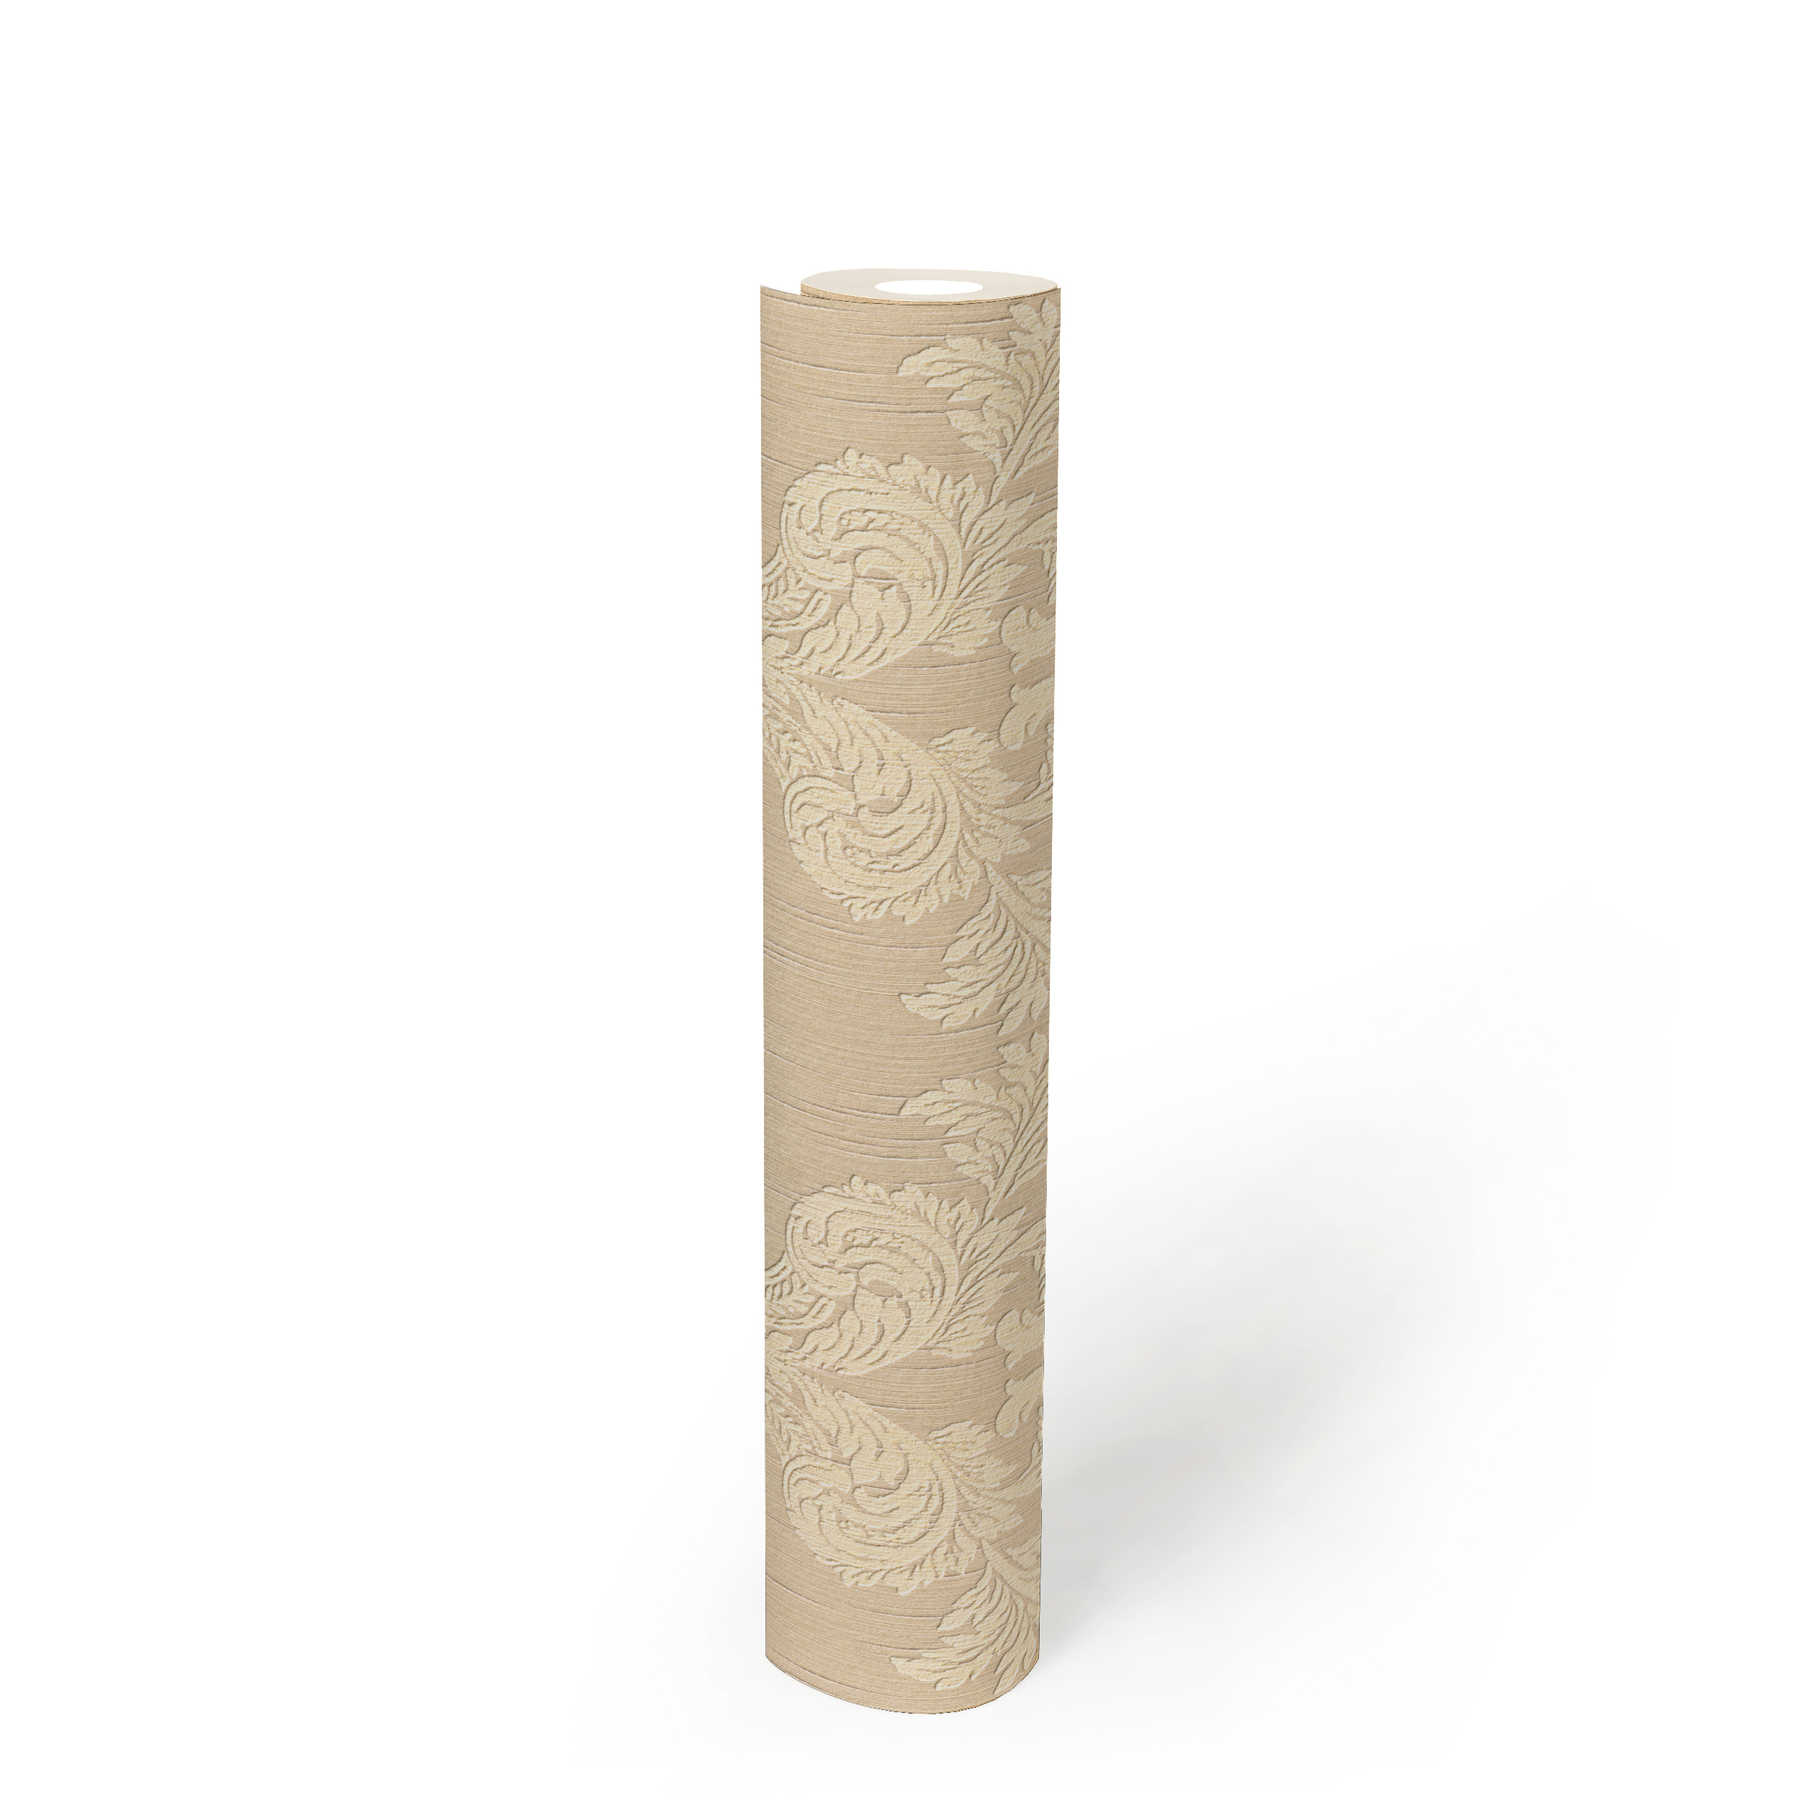             Wallpaper with textile look and ornamental pattern in classic style - beige
        